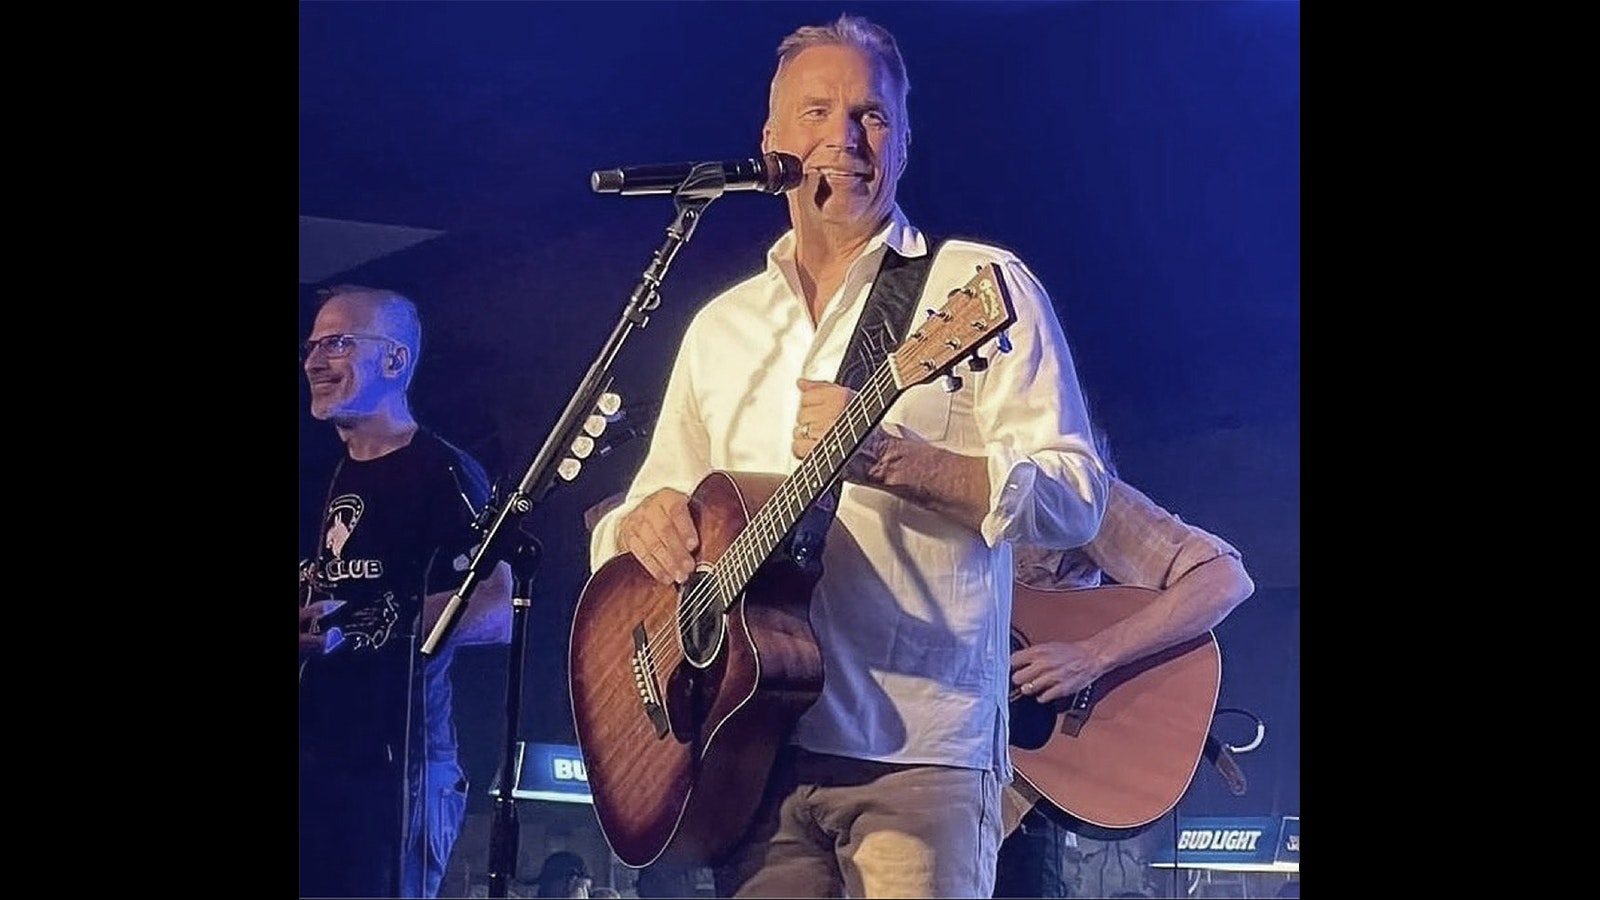 Costner on stage with his band Modern West in 2021.